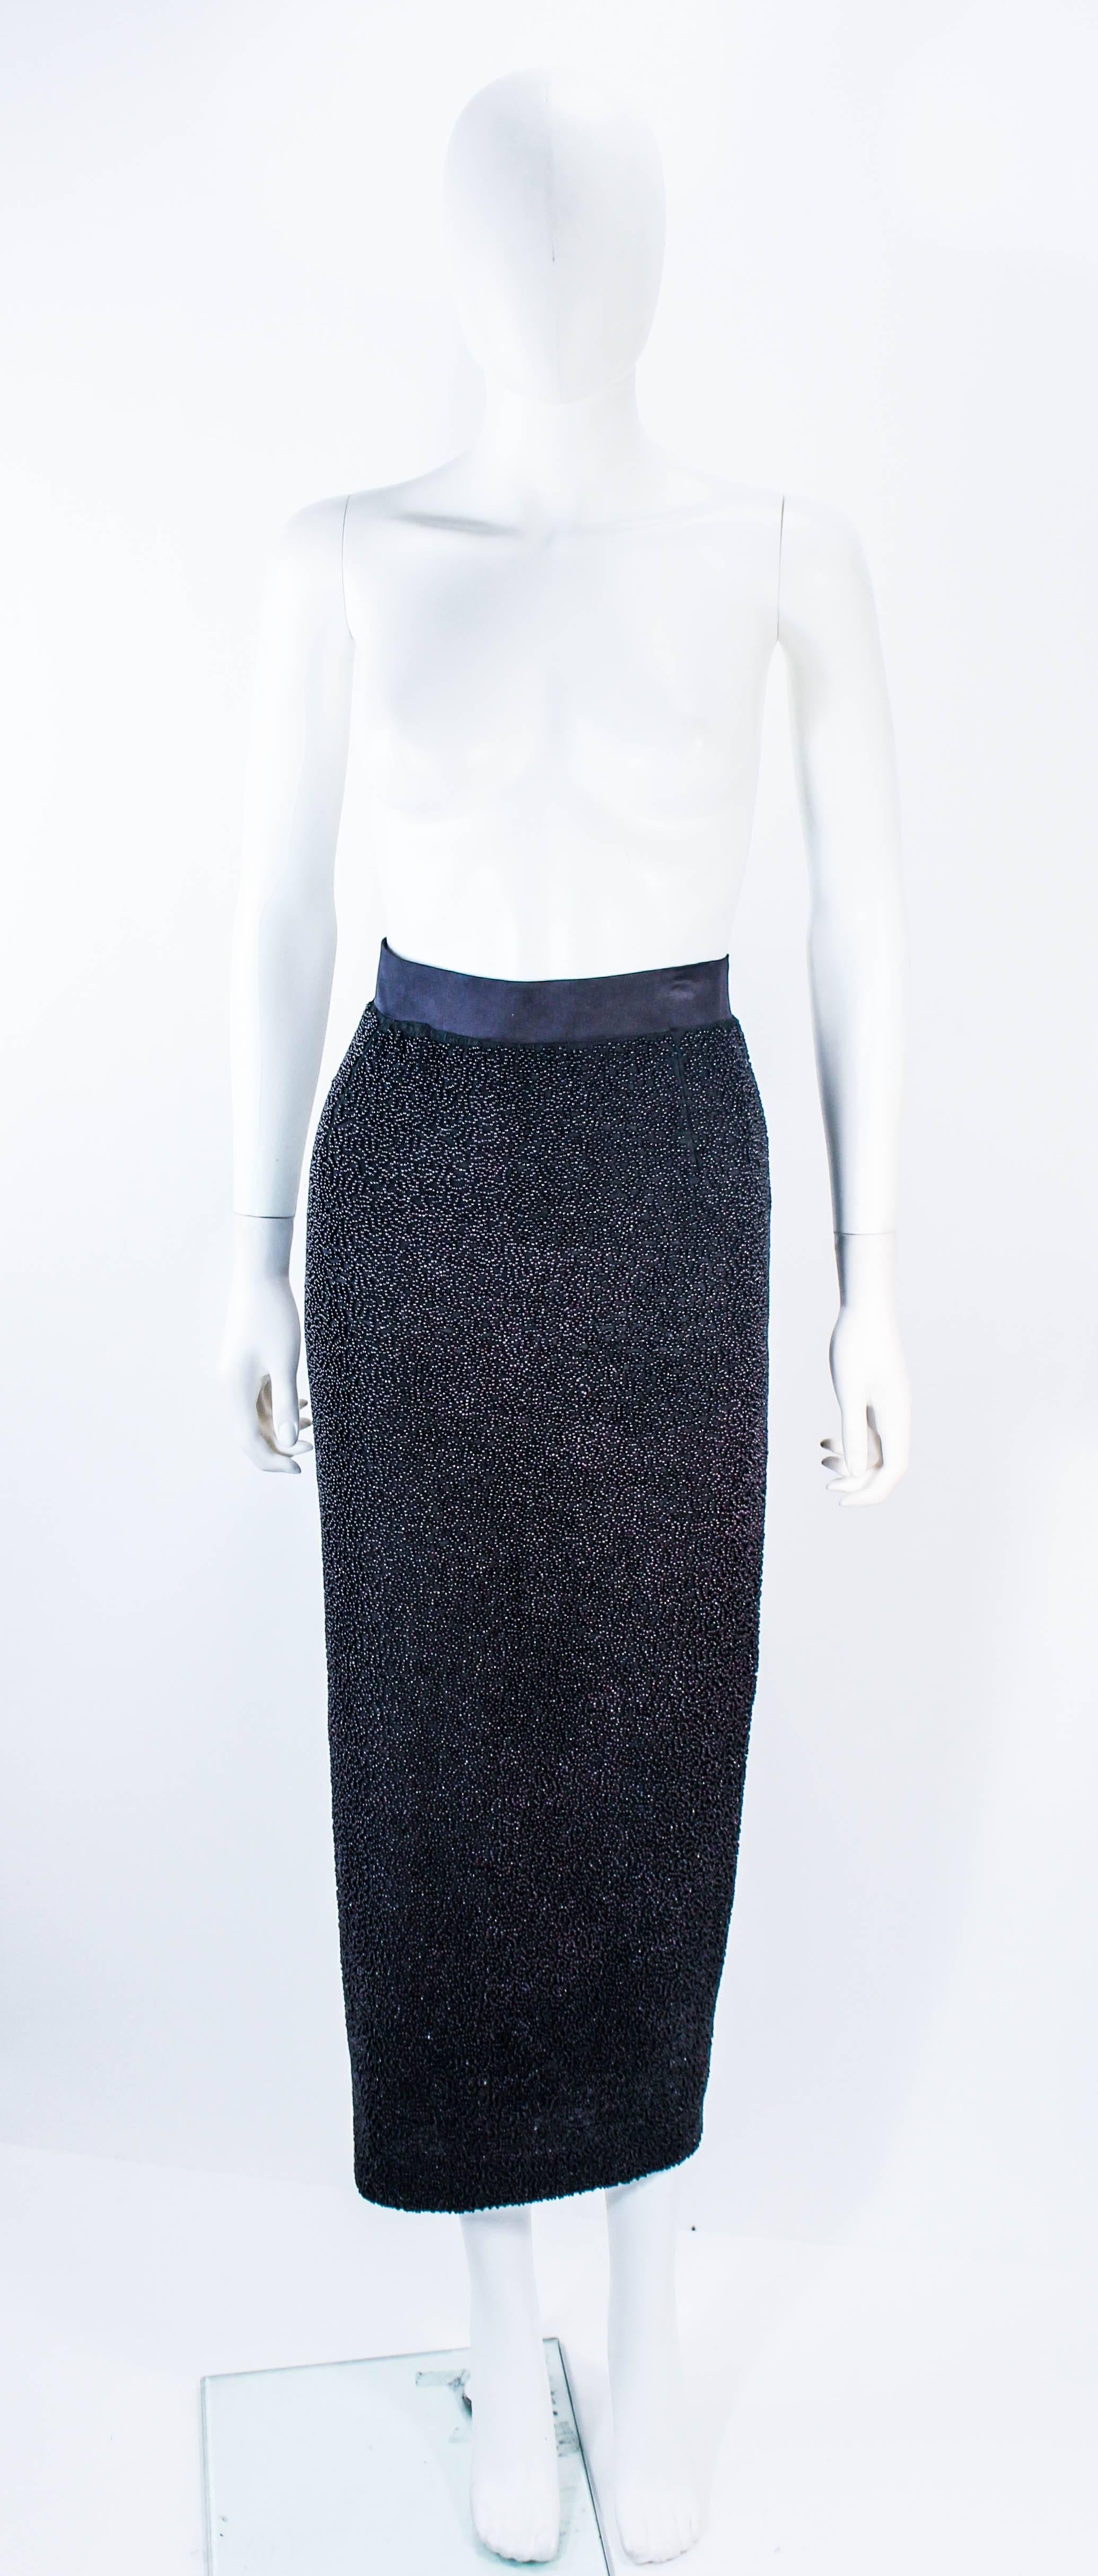 This vintage Jean Paul Gaultier skirt is composed of silk with heavy beaded applique. There is a zipper closure. In excellent vintage condition.

**Please cross-reference measurements for personal accuracy. Size in description box is an estimation.